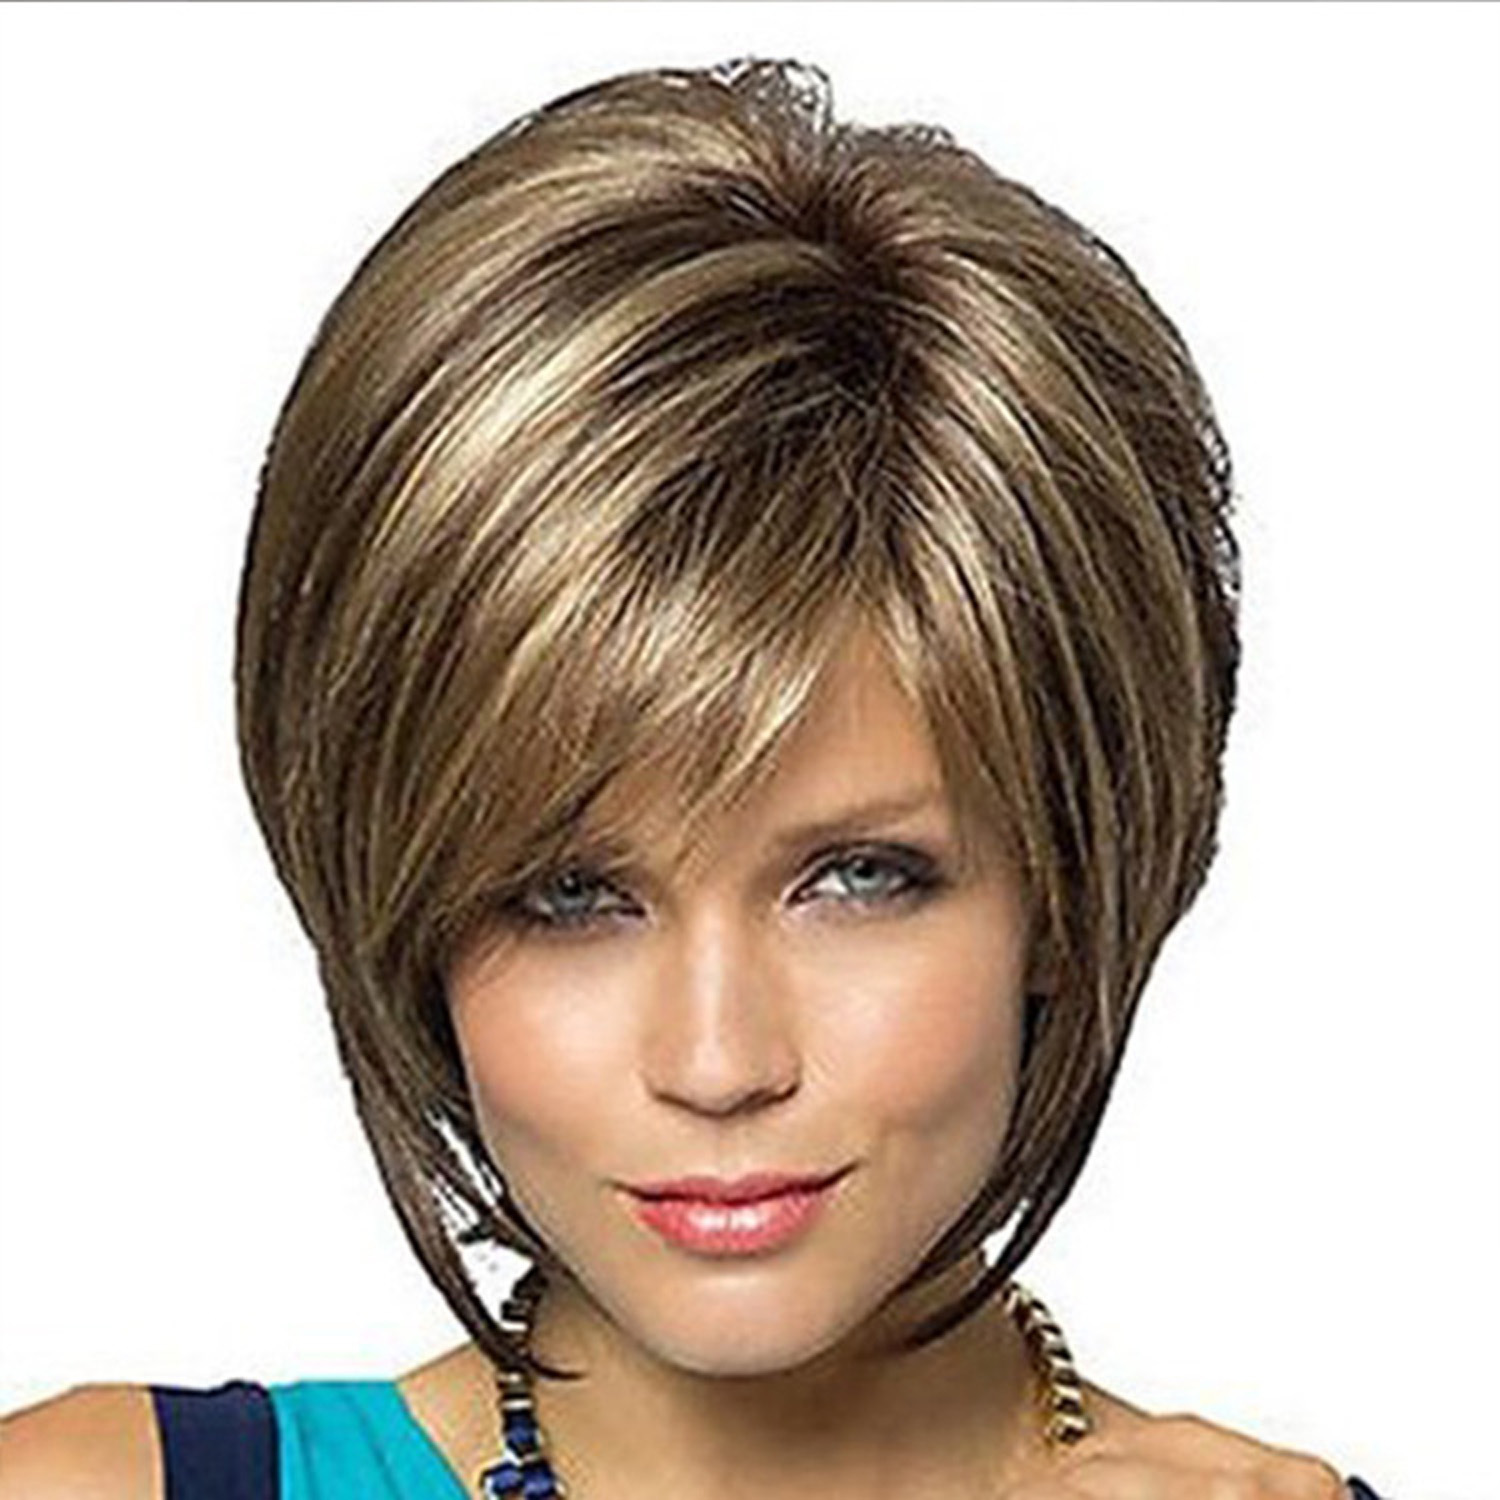 A synthetic wig featuring short straight hair with bangs, styled in vibrant mixed colors